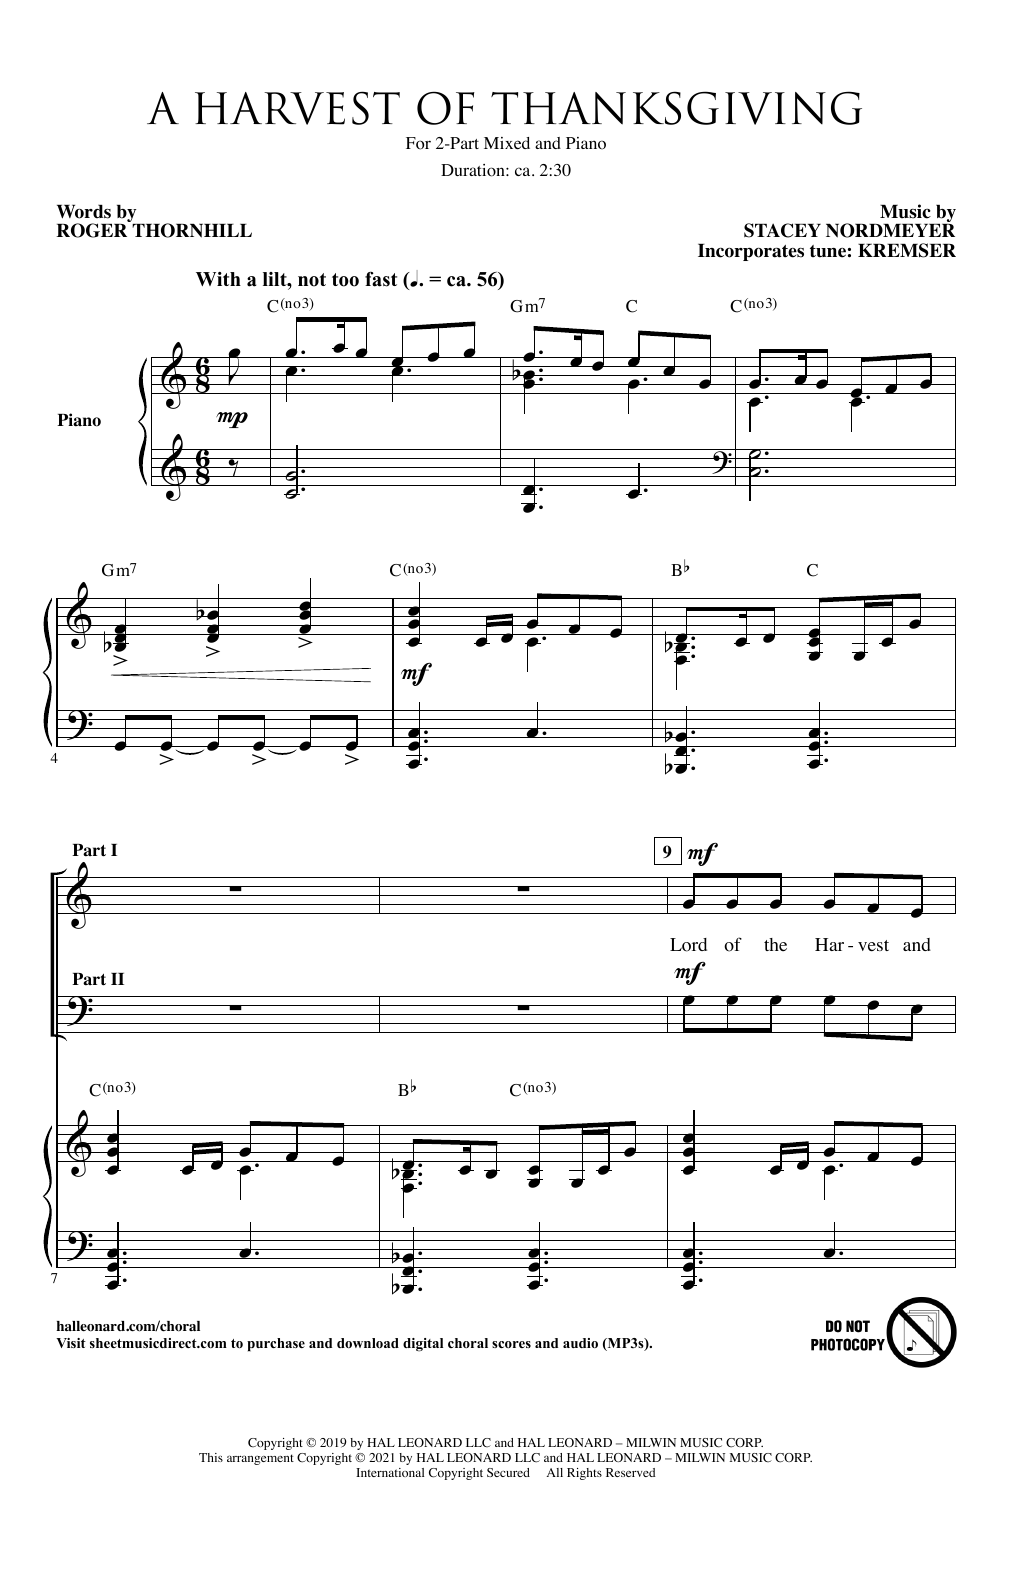 Download Roger Thornhill and Stacey Nordmeyer A Harvest Of Thanksgiving Sheet Music